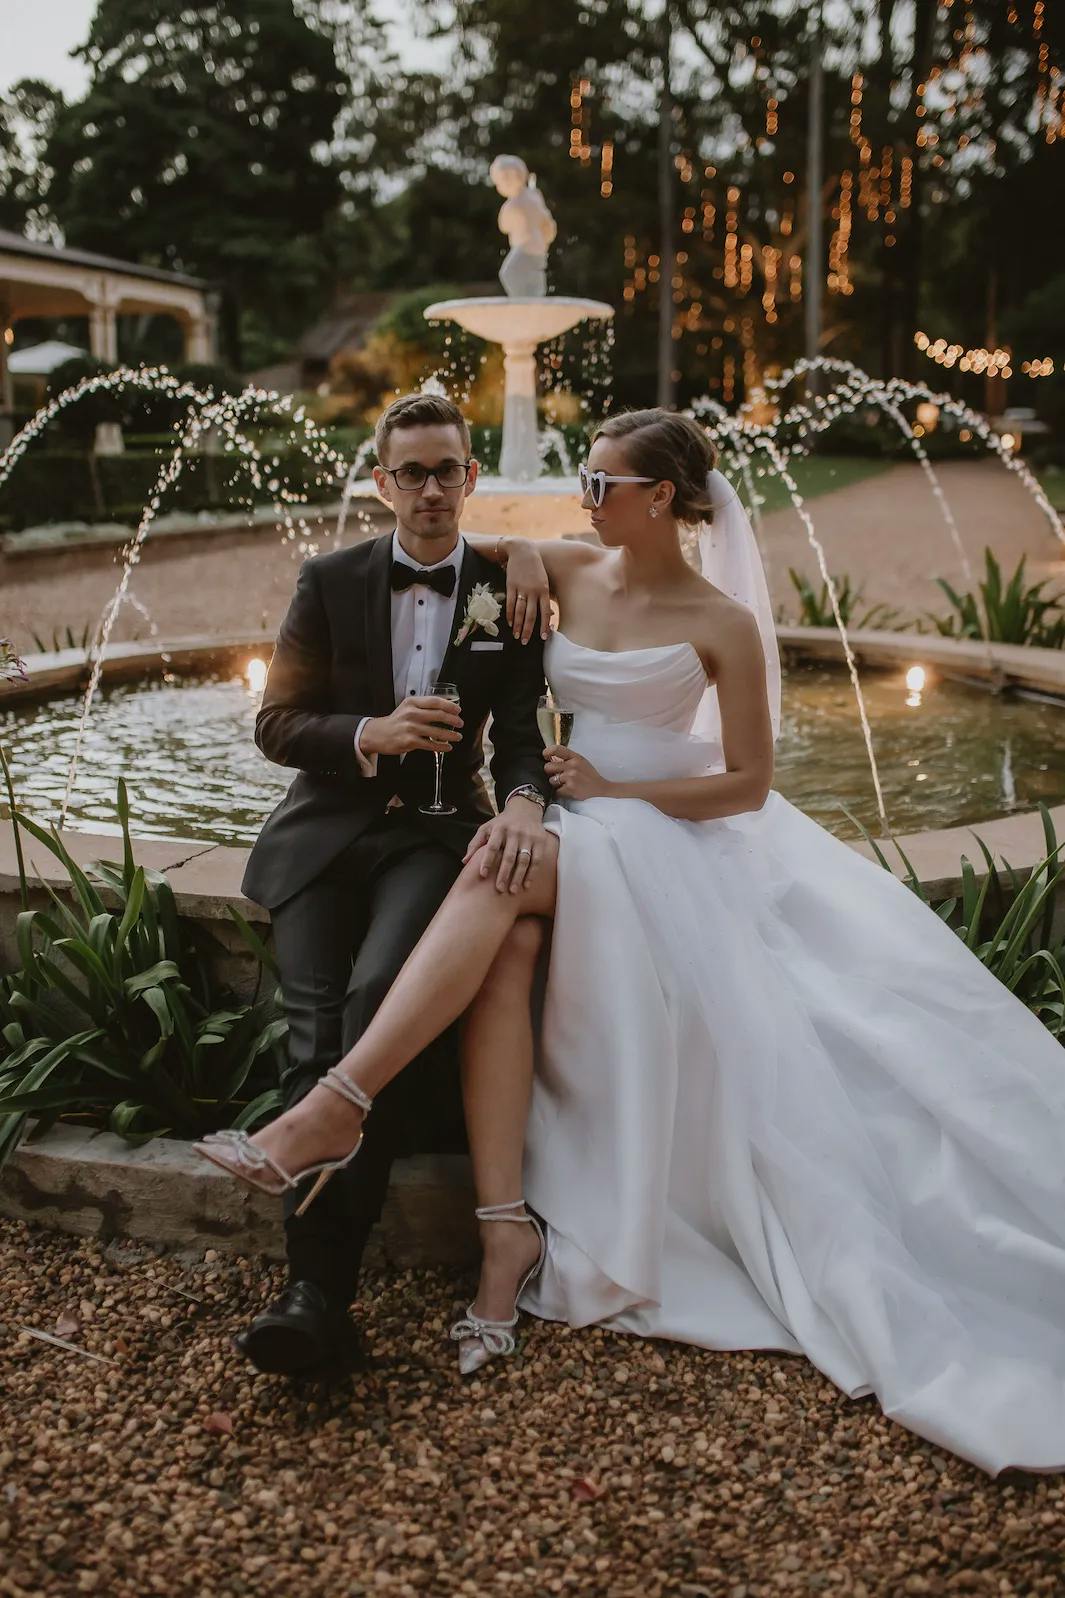 A bride and groom sit together on the edge of a stone fountain in an outdoor setting. The groom wears a black tuxedo, and the bride is in a white strapless wedding gown with a veil. They both hold champagne glasses, and the bride is wearing sunglasses. Fairy lights are visible in the background.